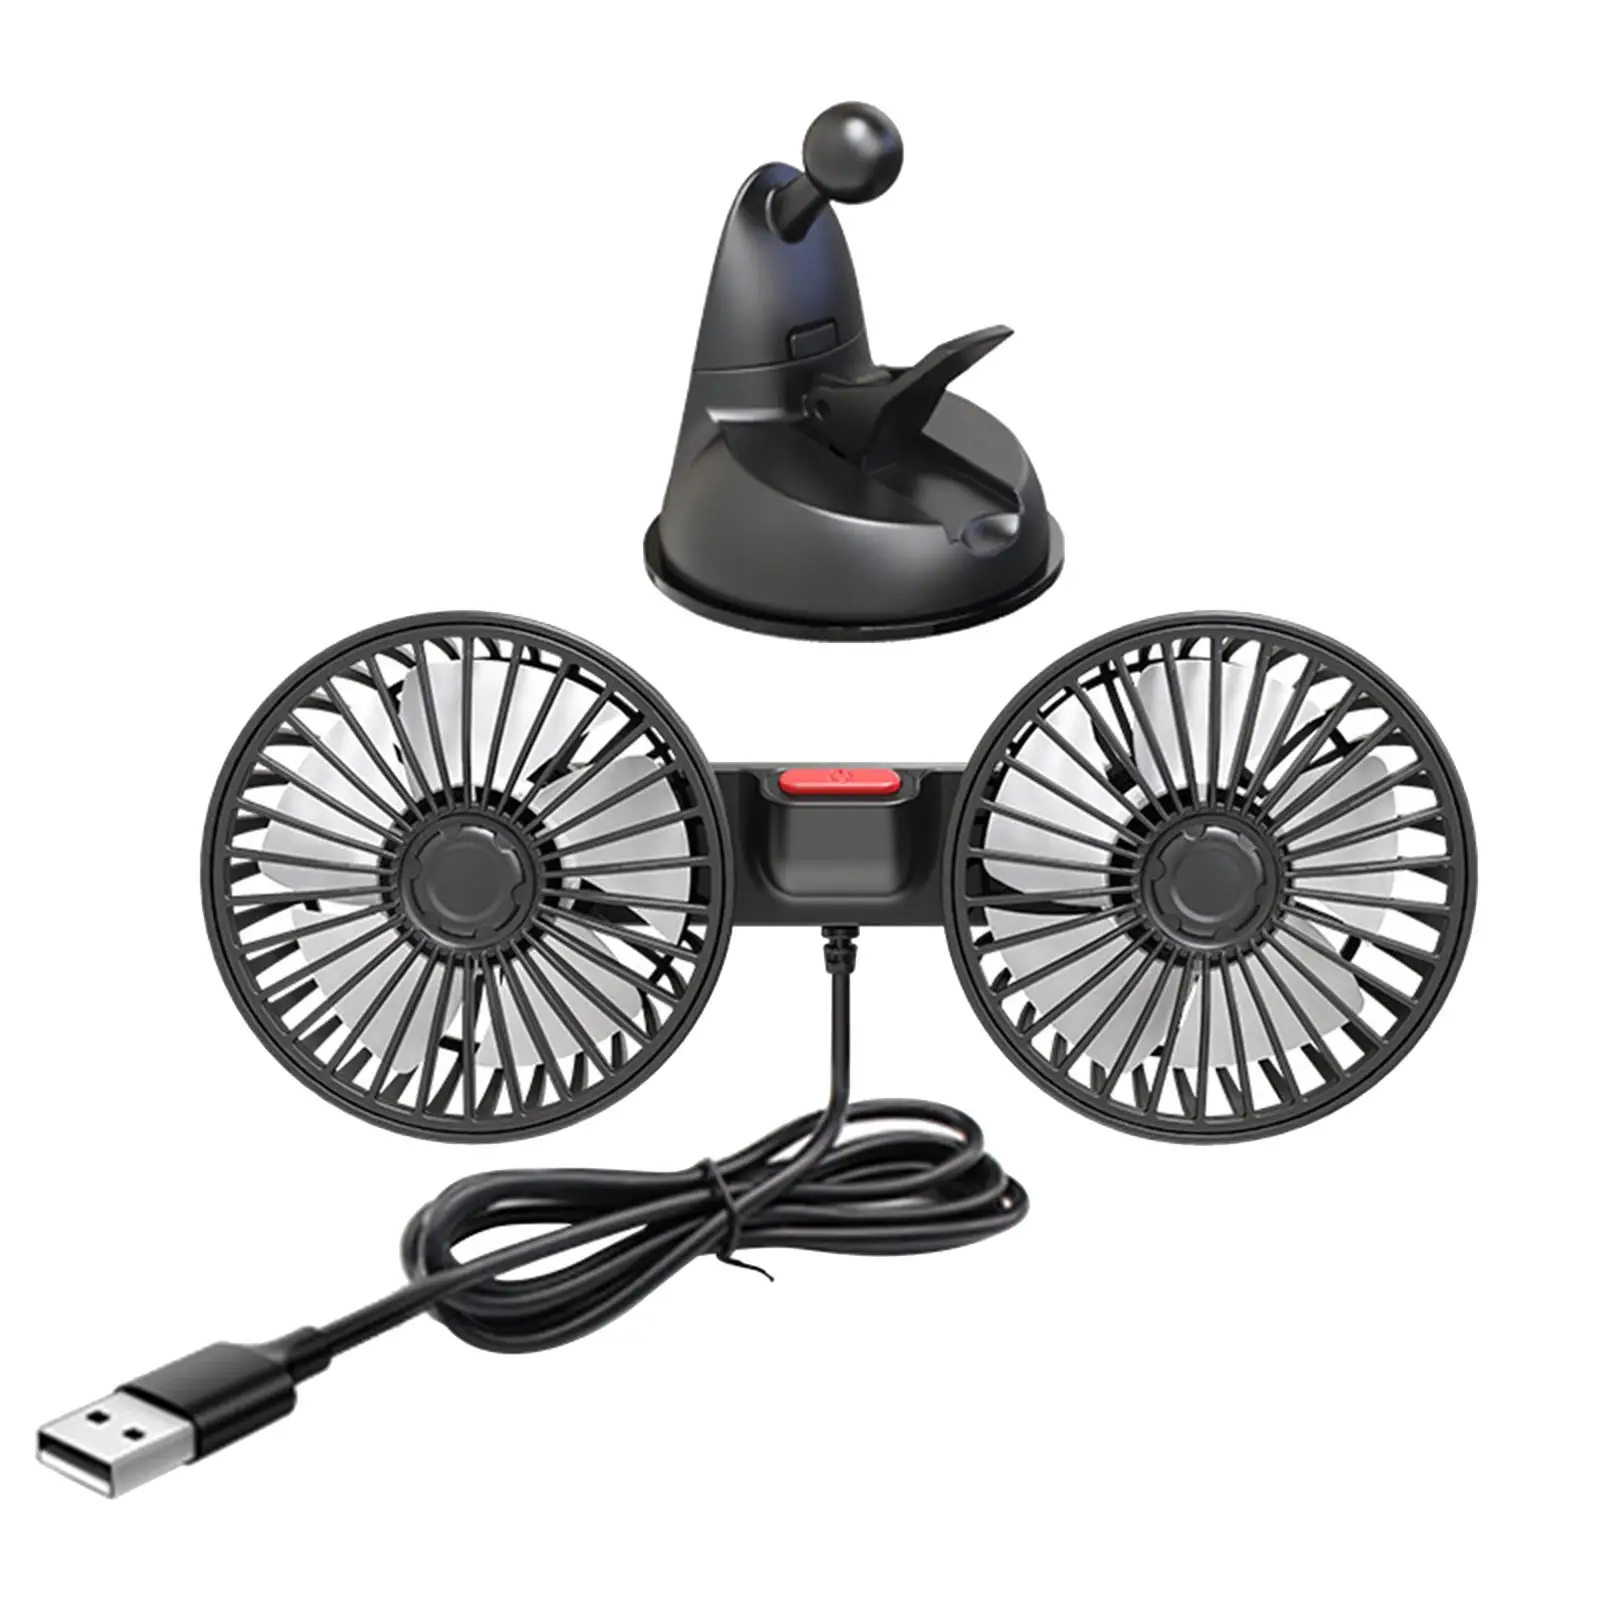 Auto Cooling Fan Low Noise Auto Cooler Air for Dashboard Office Truck